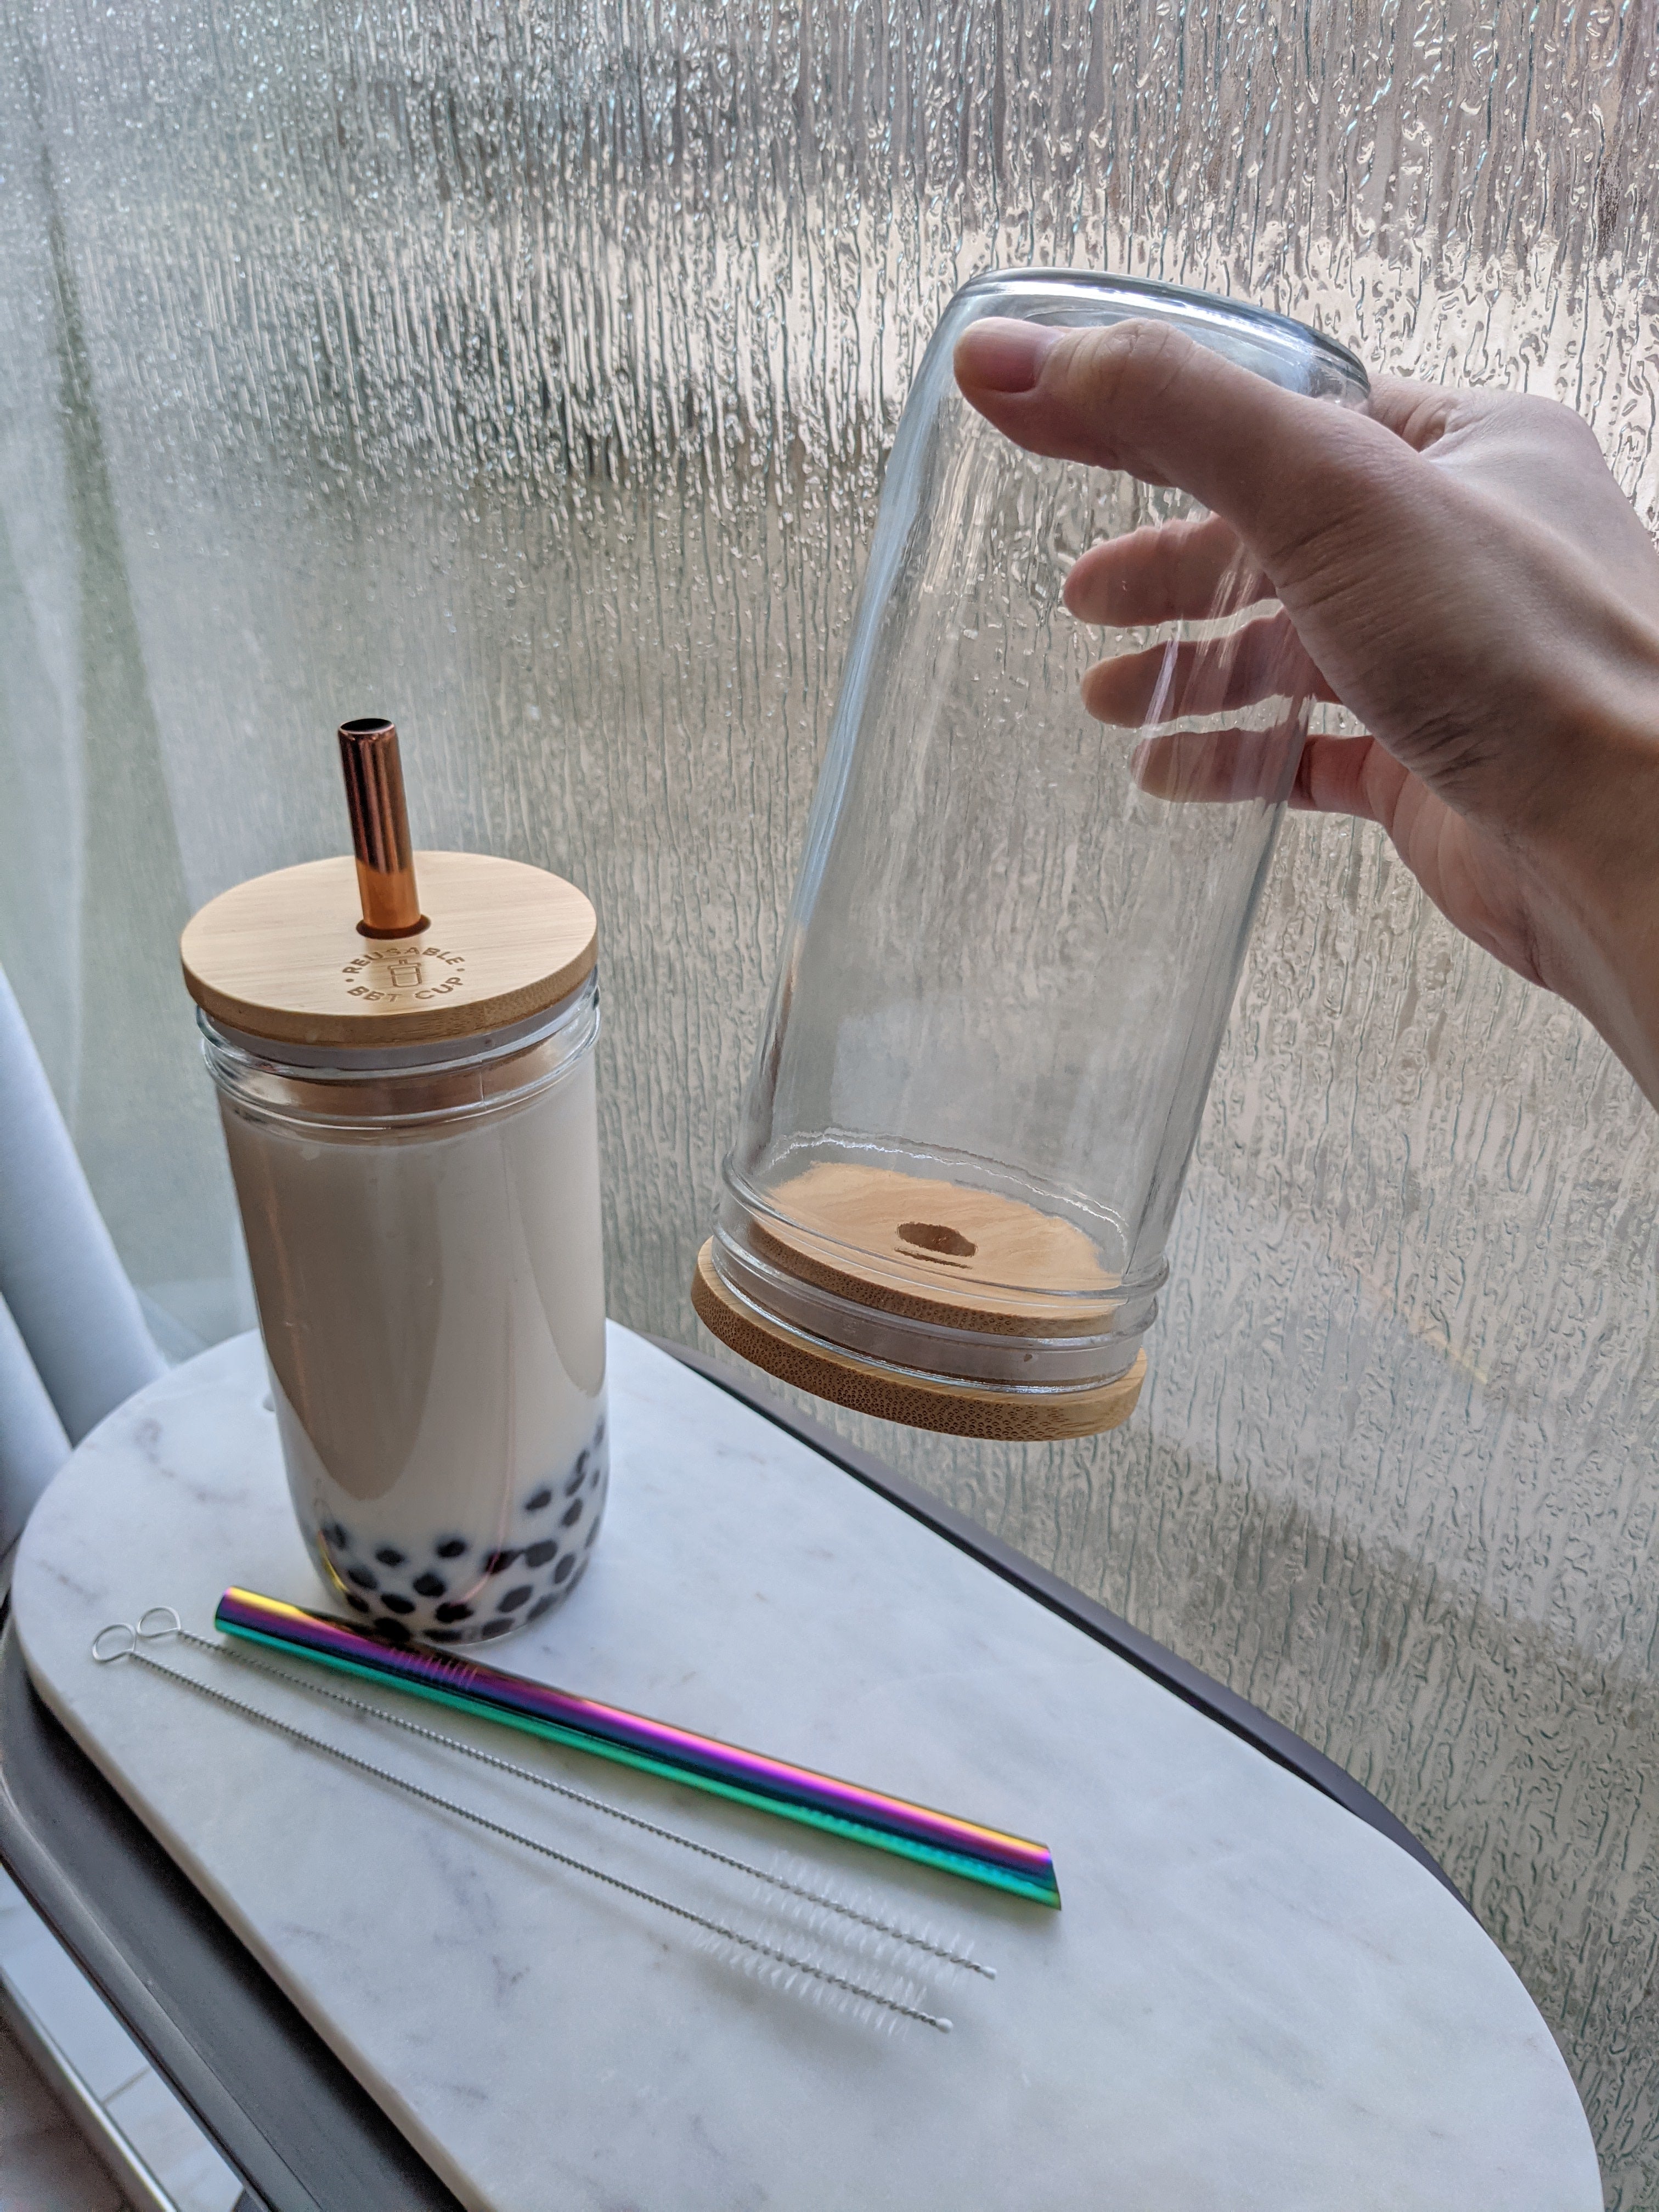 2 PACK: Reusable Bubble Tea Cup With Bamboo Lid, Bubble Tea and Smoothie  Straw 